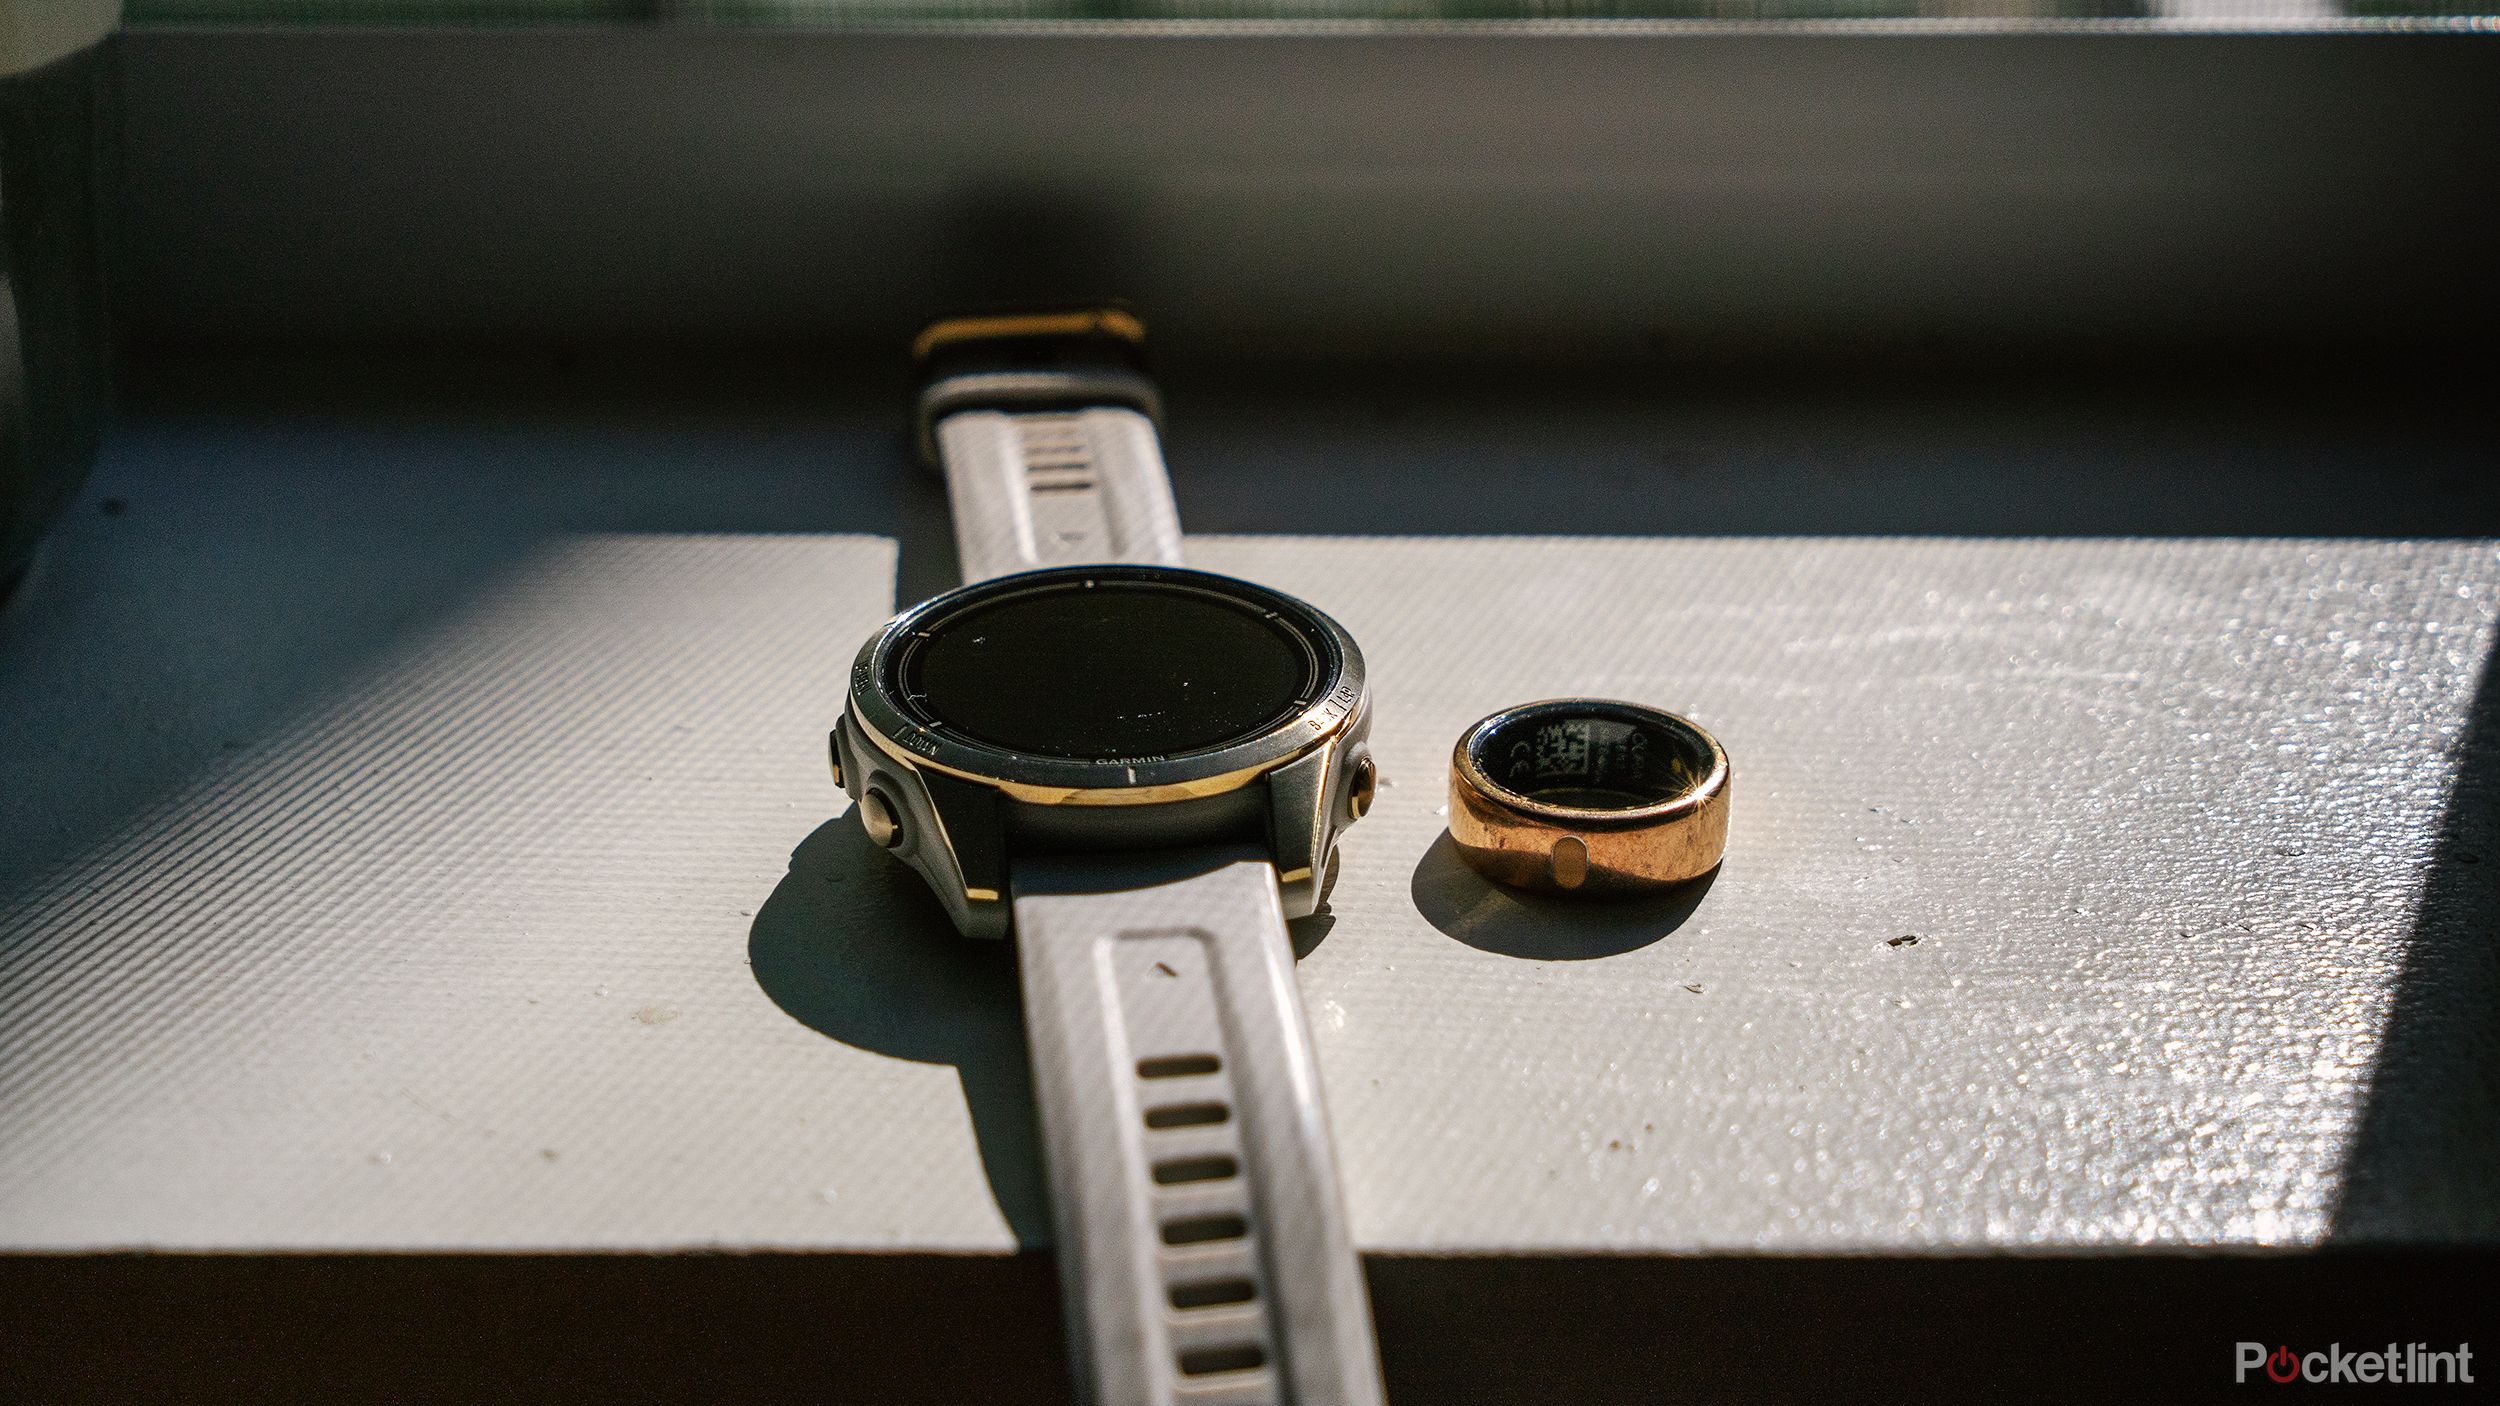 Why I'm sticking to a smartwatch over a smart ring